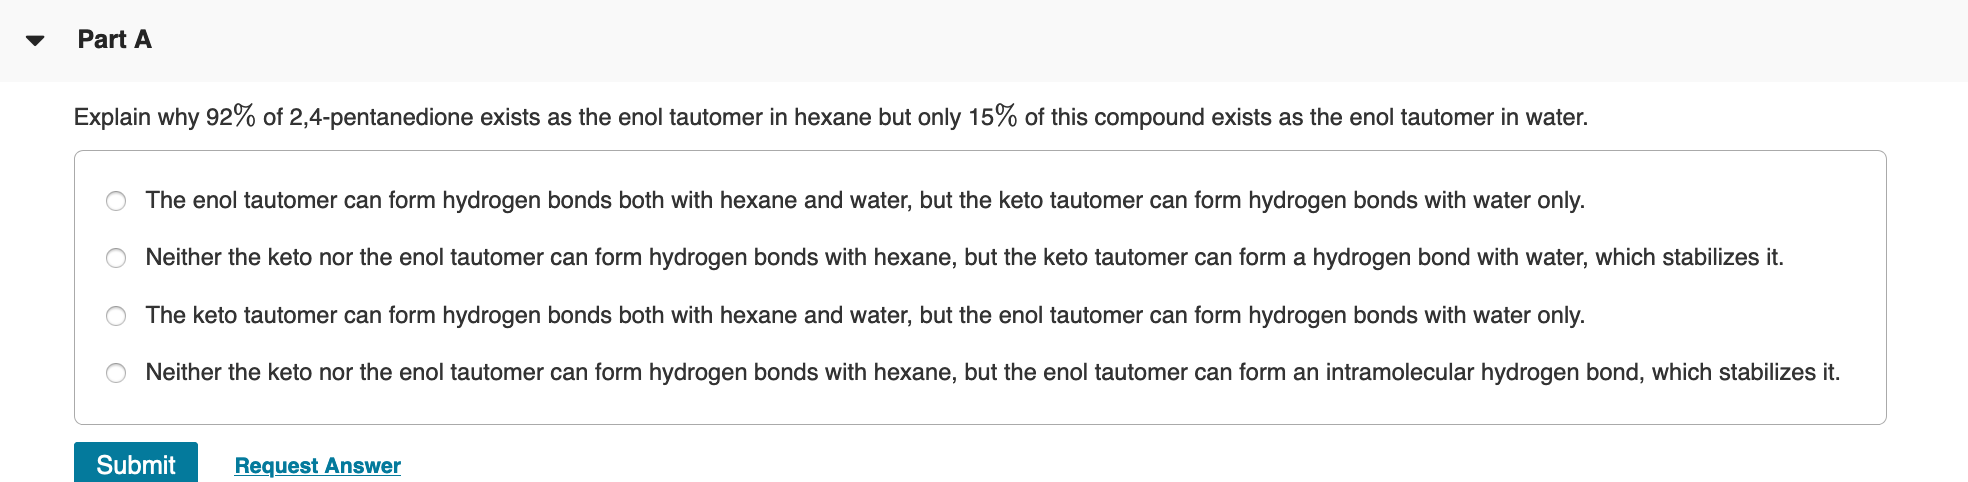 Explain why 92% of 2,4-pentanedione exists as the enol tautomer in hexane but only 15% of this compound exists as the enol tautomer in water.
The enol tautomer can form hydrogen bonds both with hexane and water, but the keto tautomer can form hydrogen bonds with water only.
Neither the keto nor the enol tautomer can form hydrogen bonds with hexane, but the keto tautomer can form a hydrogen bond with water, which stabilizes it.
The keto tautomer can form hydrogen bonds both with hexane and water, but the enol tautomer can form hydrogen bonds with water only.
Neither the keto nor the enol tautomer can form hydrogen bonds with hexane, but the enol tautomer can form an intramolecular hydrogen bond, which stabilizes it.
